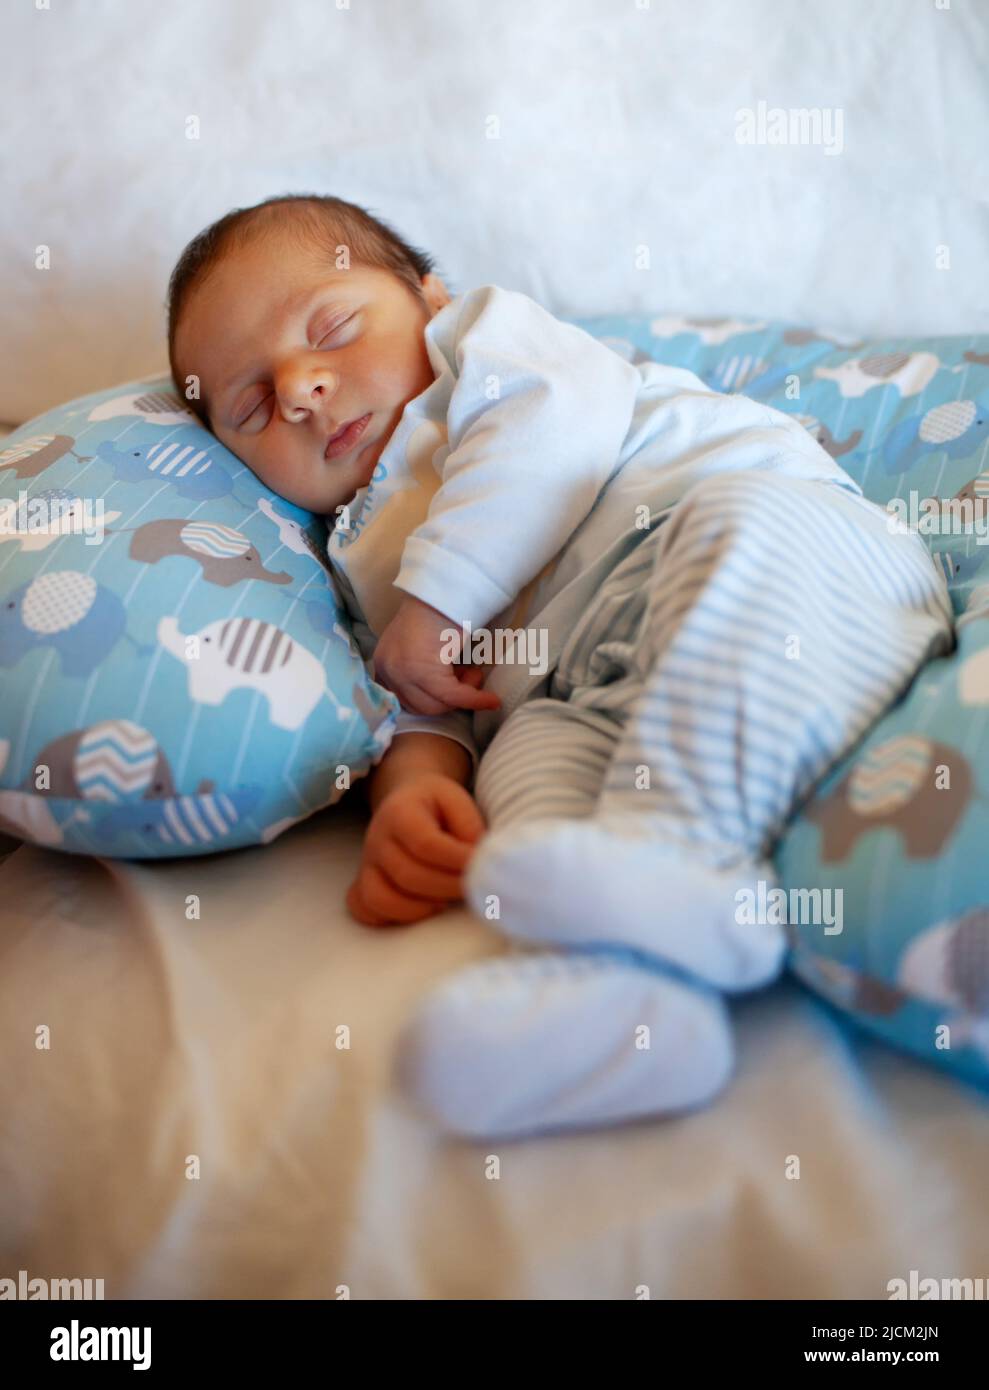 A few days old baby sleeps on a round pillow. The sleep phase is very important in childhood. Stock Photo